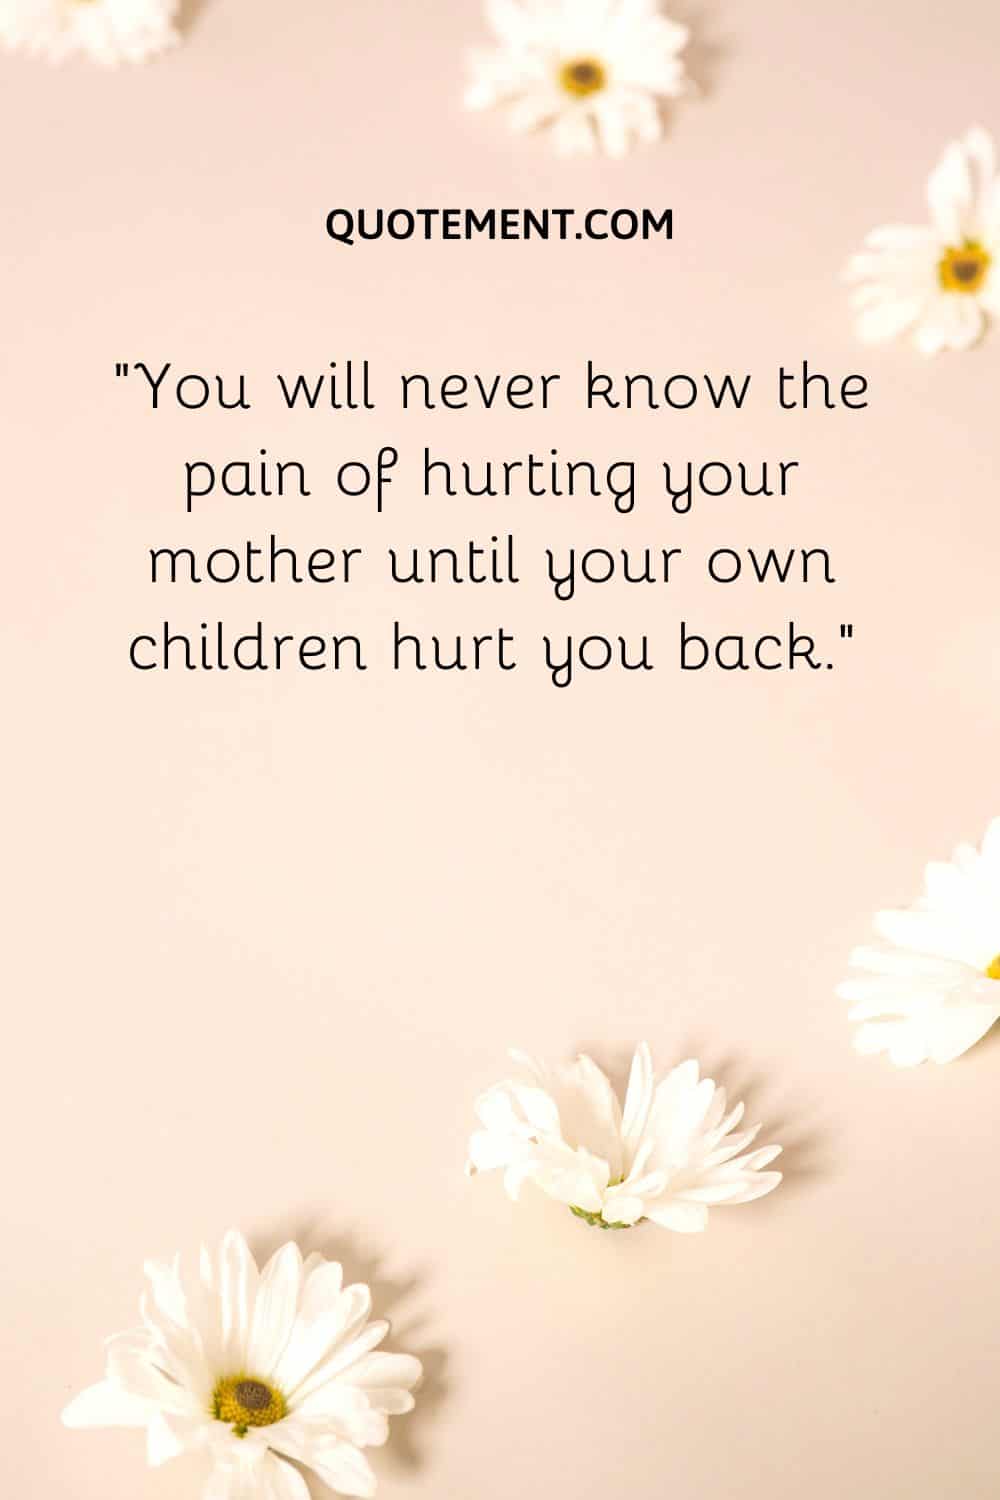 You will never know the pain of hurting your mother until your own children hurt you back.